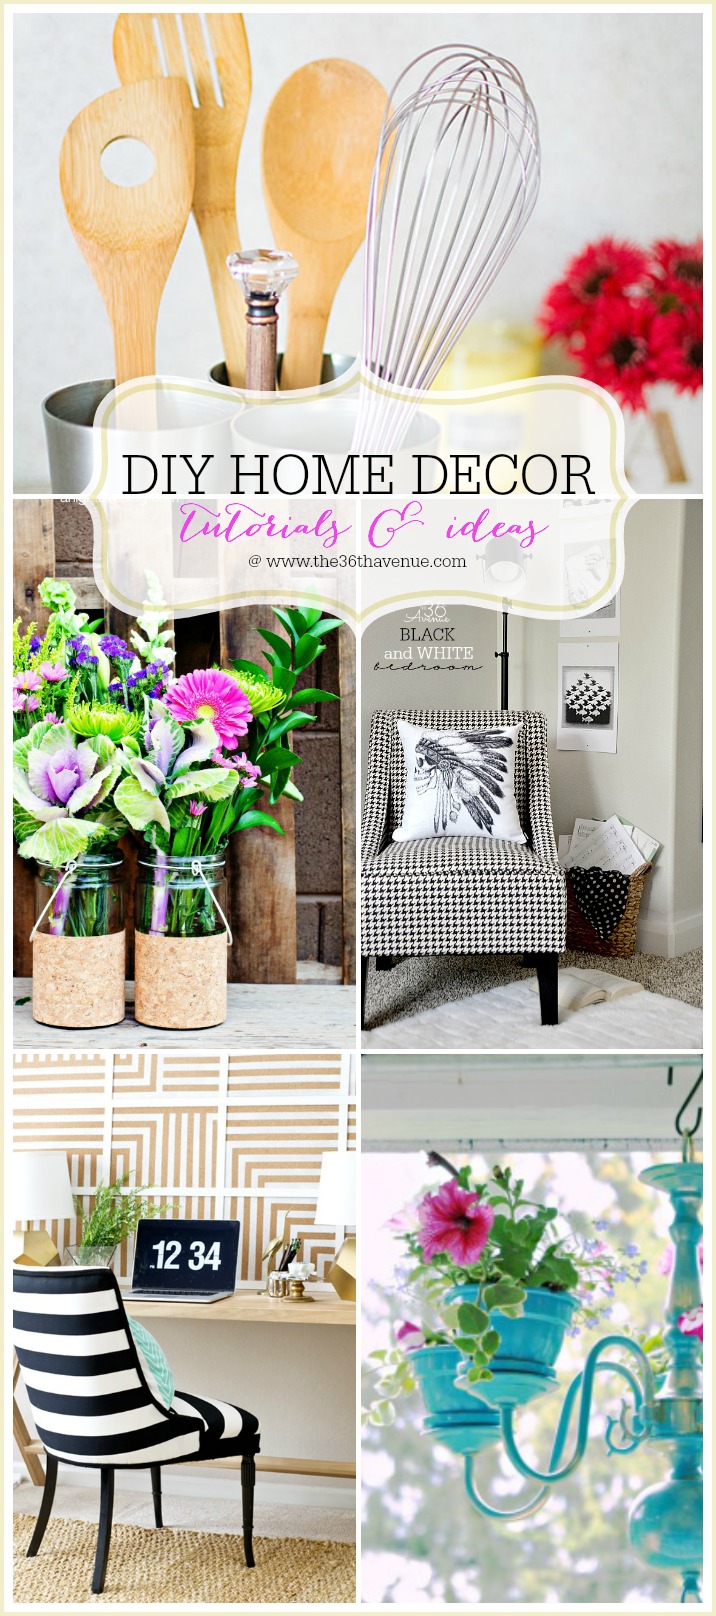 Pin on home and DIY projects